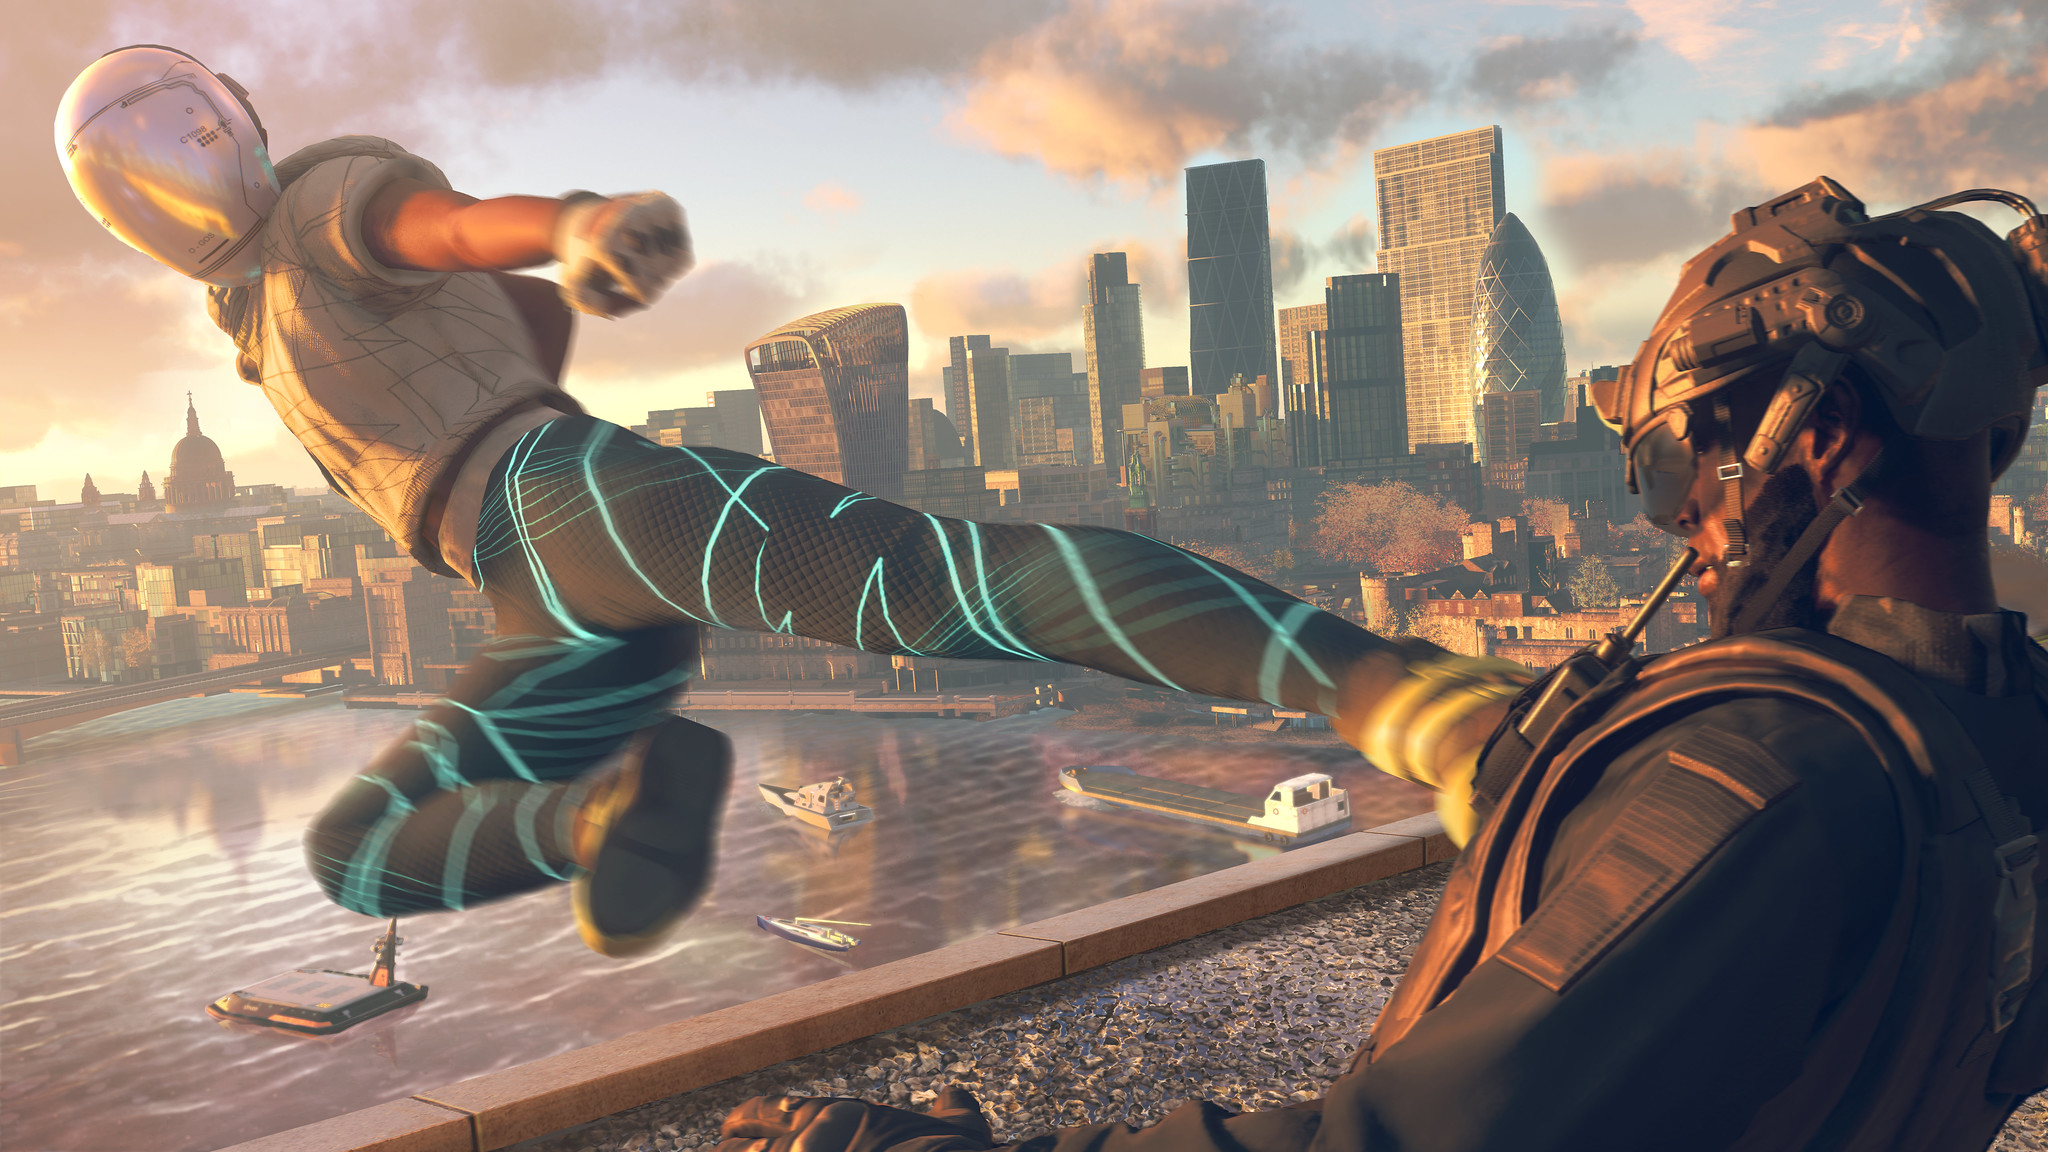 Hands On: The Watch Dogs Legion Gimmick Can't Hide Tired Gameplay